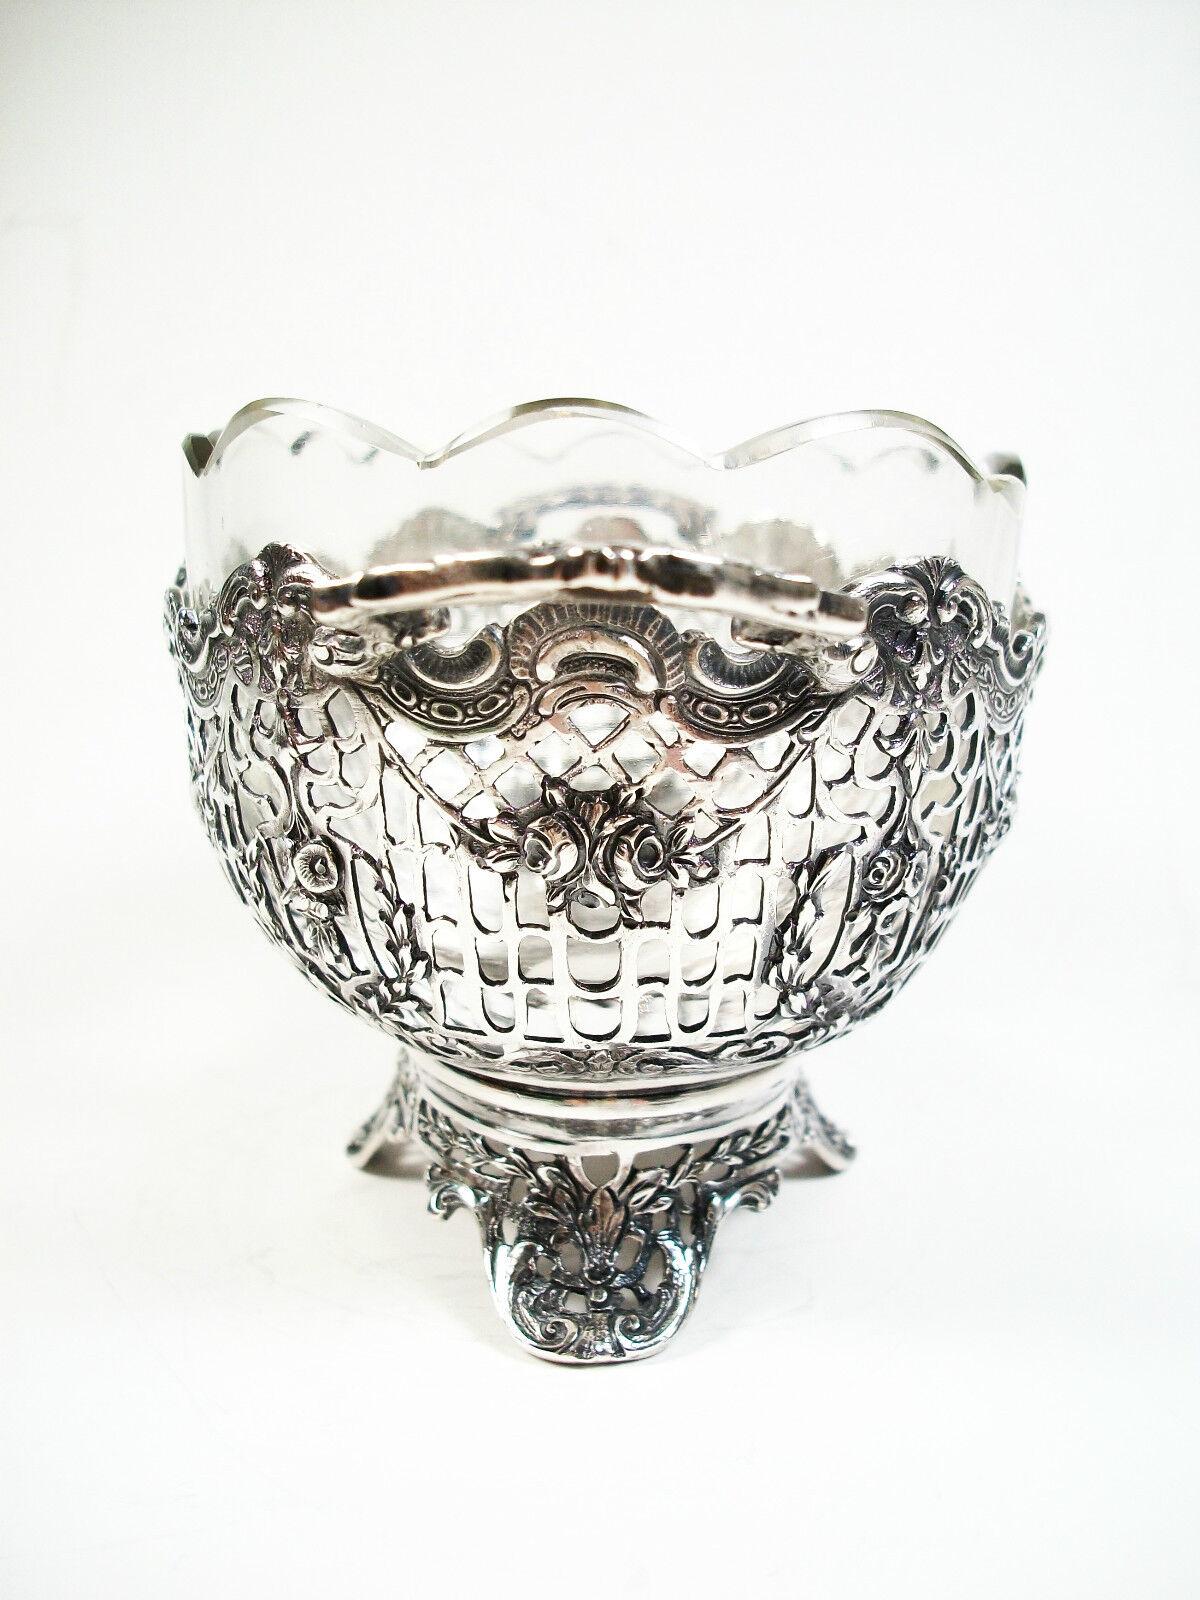 Hand-Crafted J. L. Schlingloff, German Silver Basket with Glass Liner, Early 20th Century For Sale